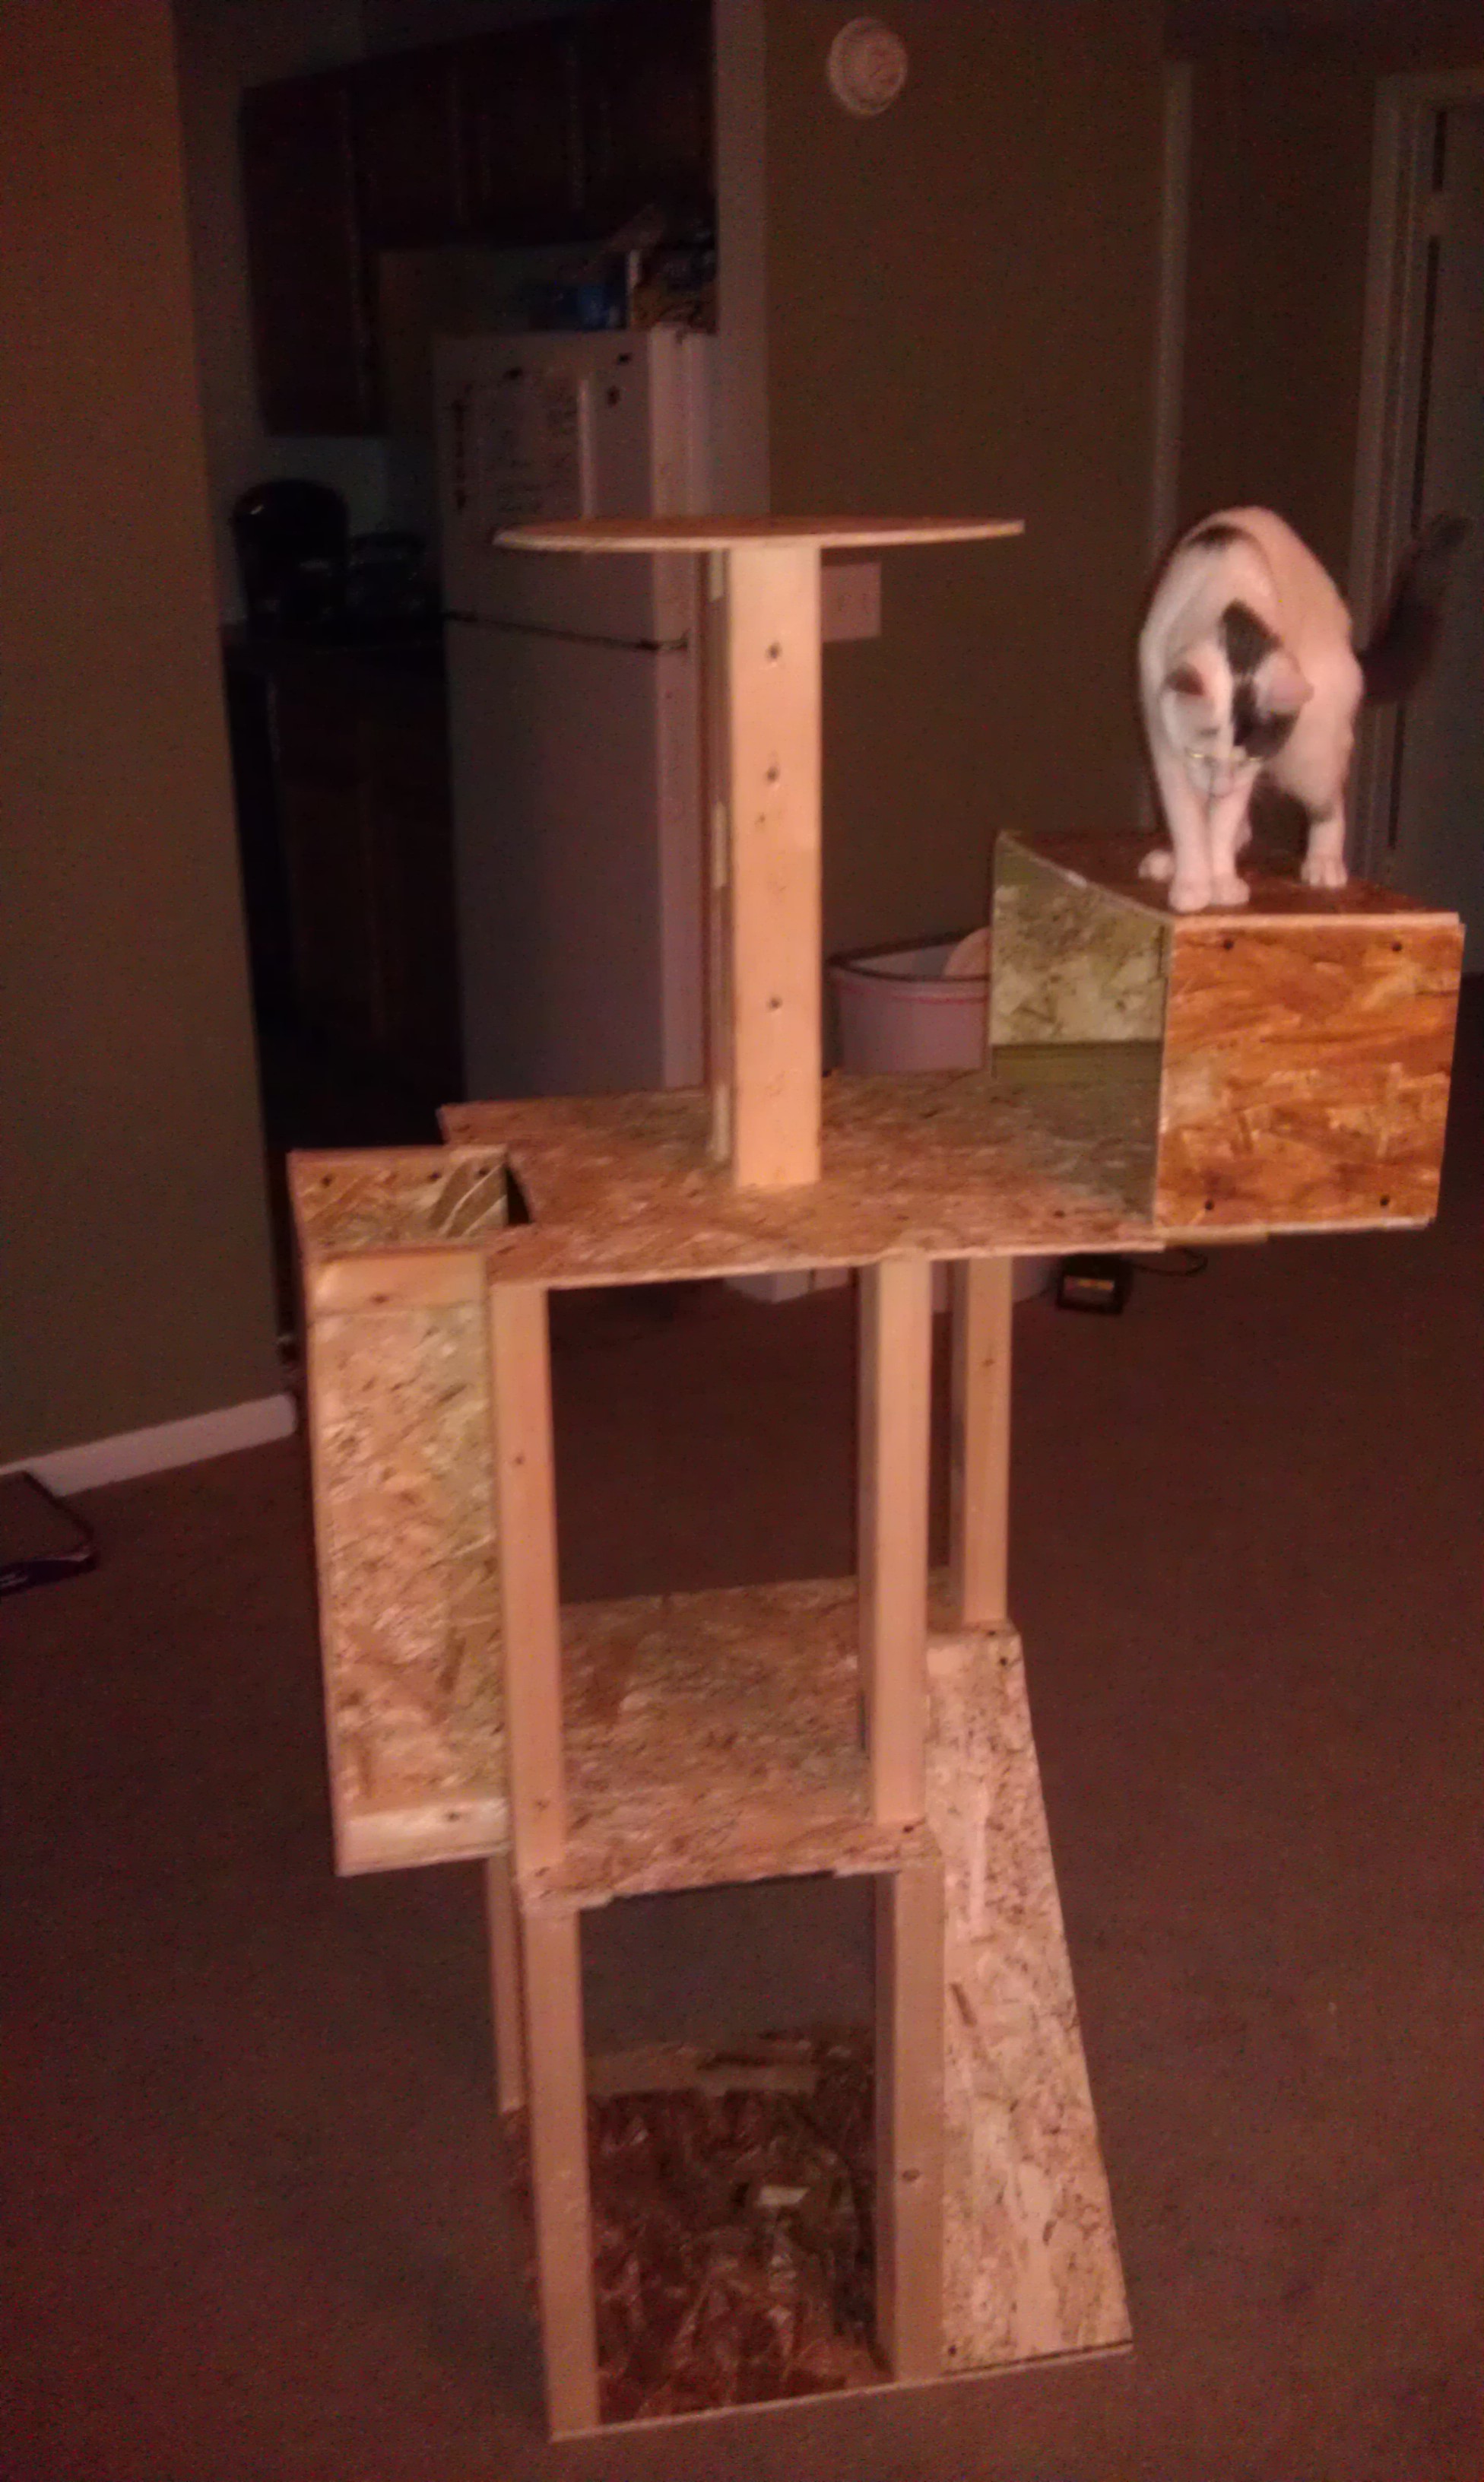 Captain checking out new cat tower